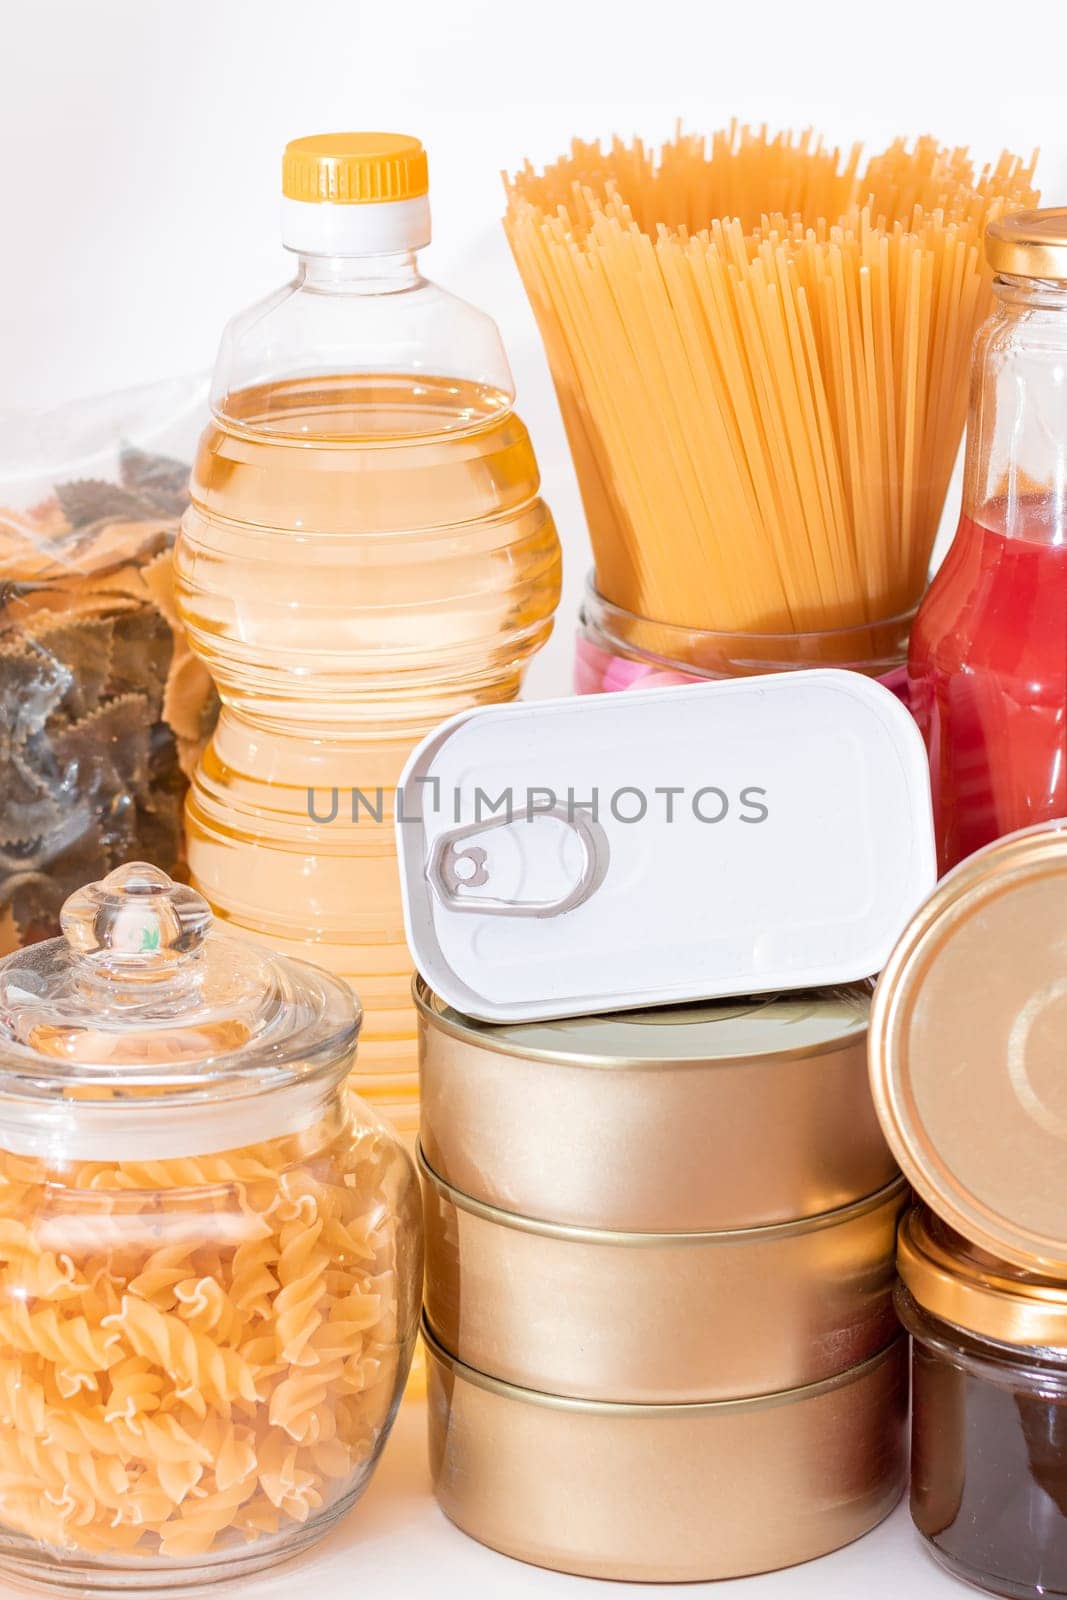 Food Reserves: Canned Food, Spaghetti, Tomato Juice, Pasta and Grocery. Emergency Food Storage in Case of Crisis. Strategic Food Supplies